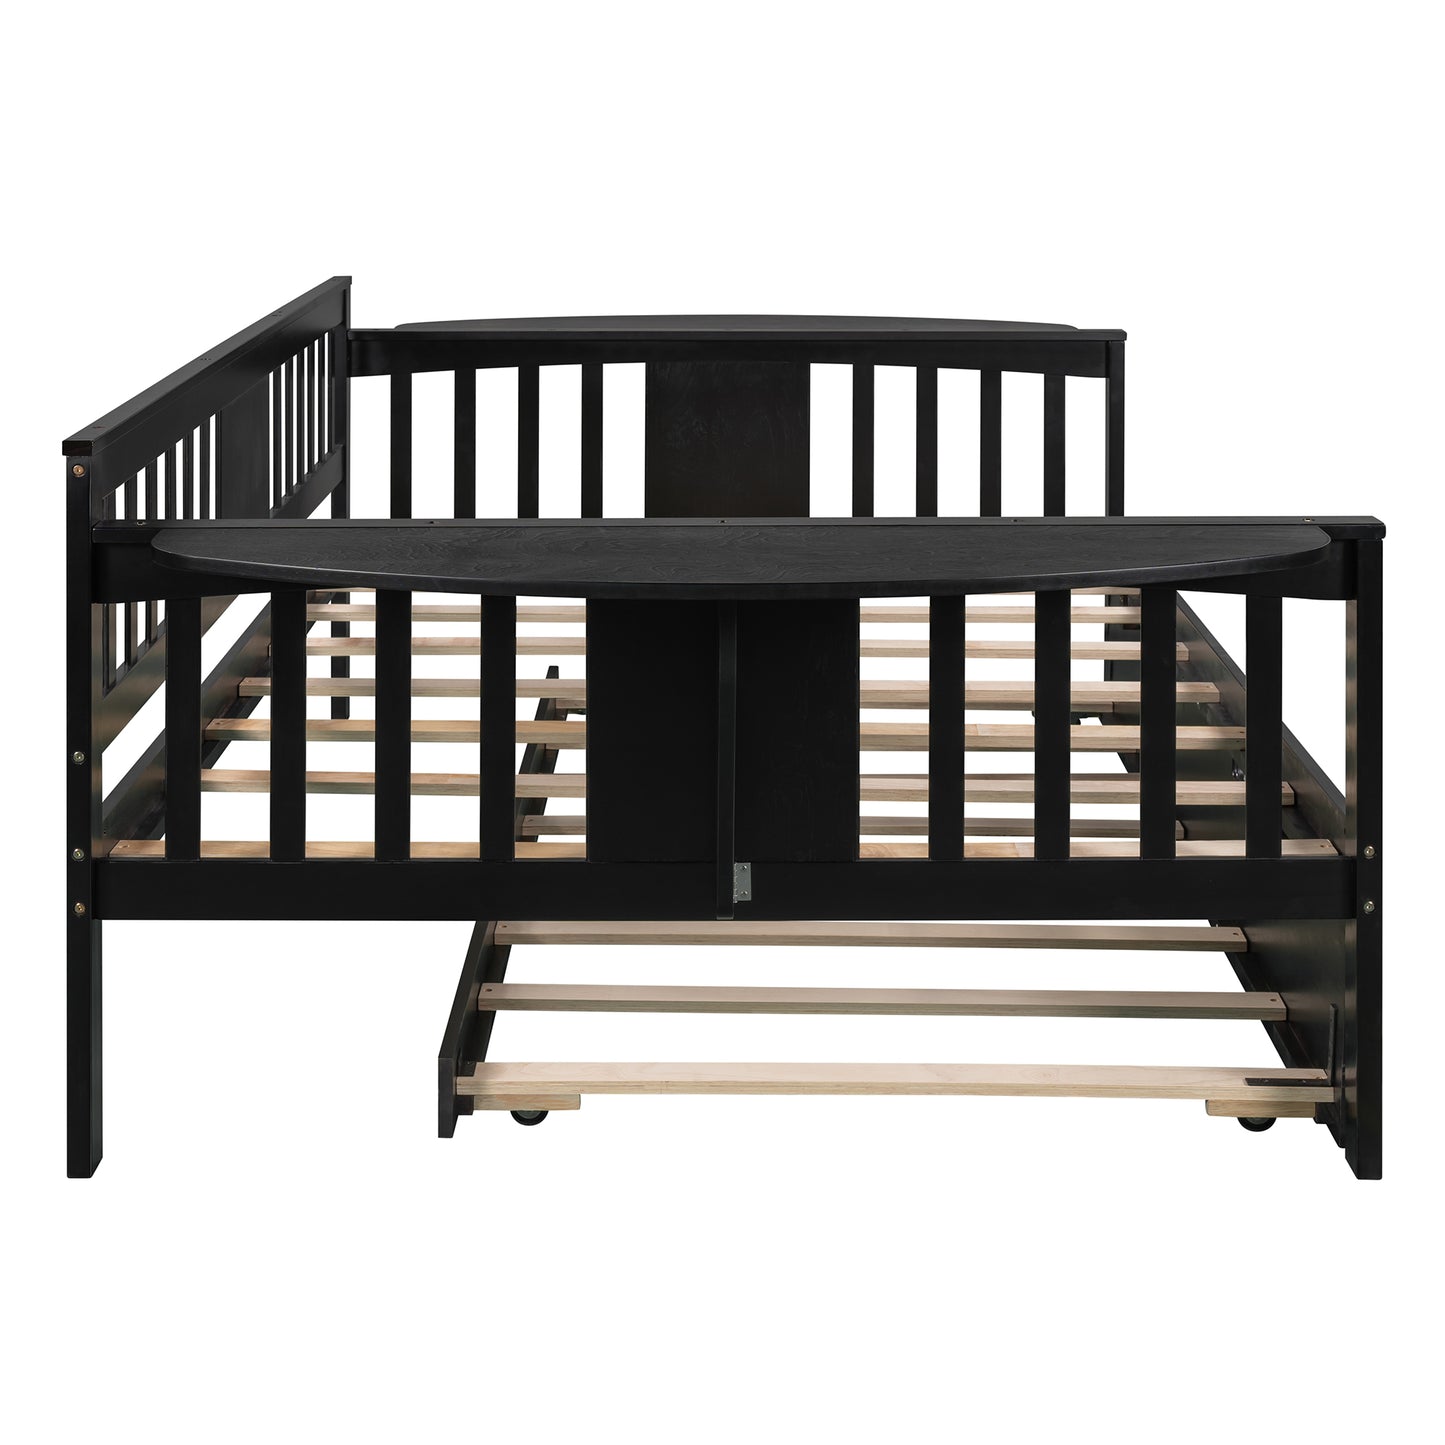 Full size Daybed with Twin size Trundle, Wood Slat Support, Espresso